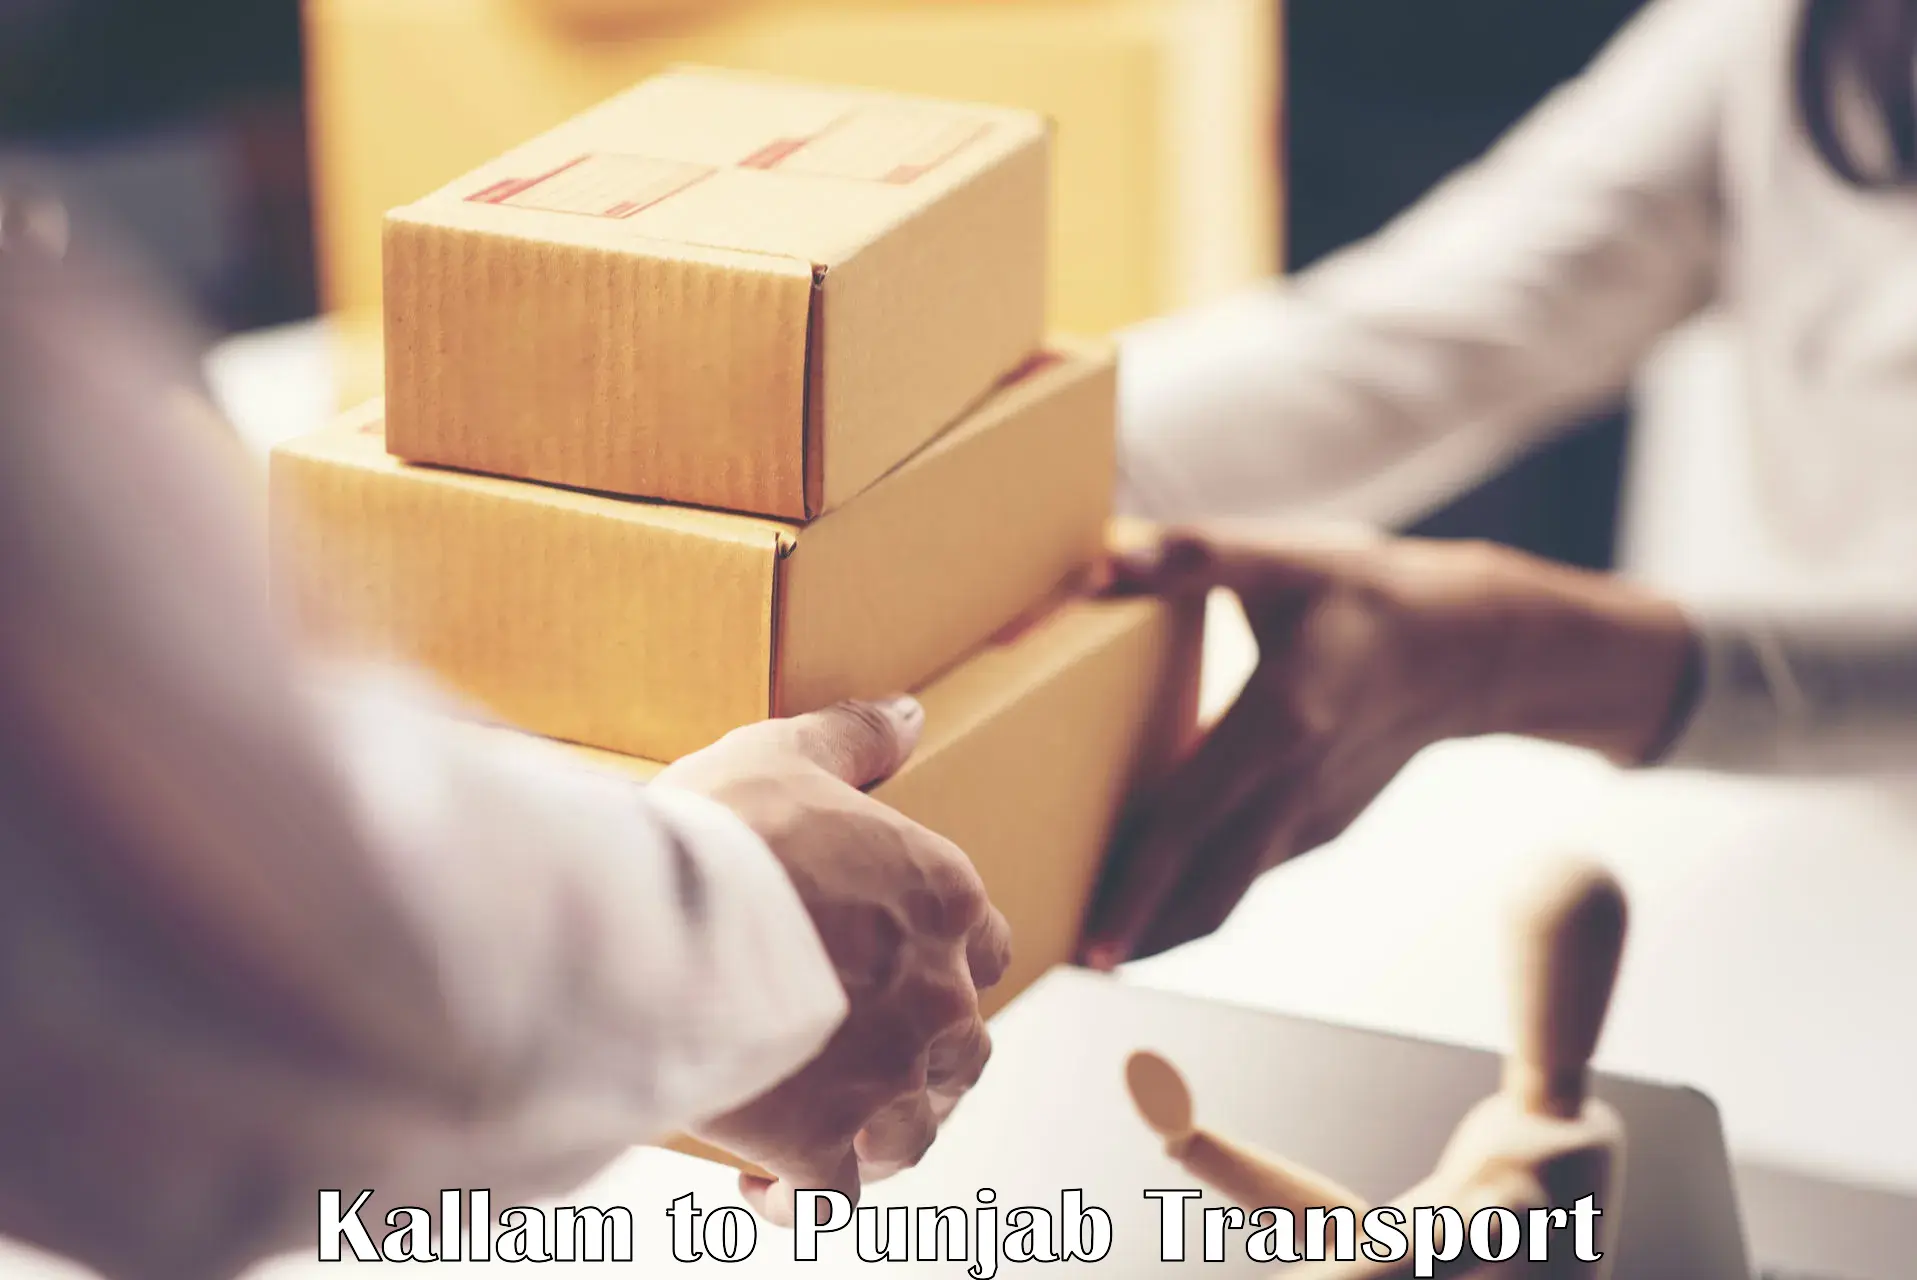 Daily transport service Kallam to Malout